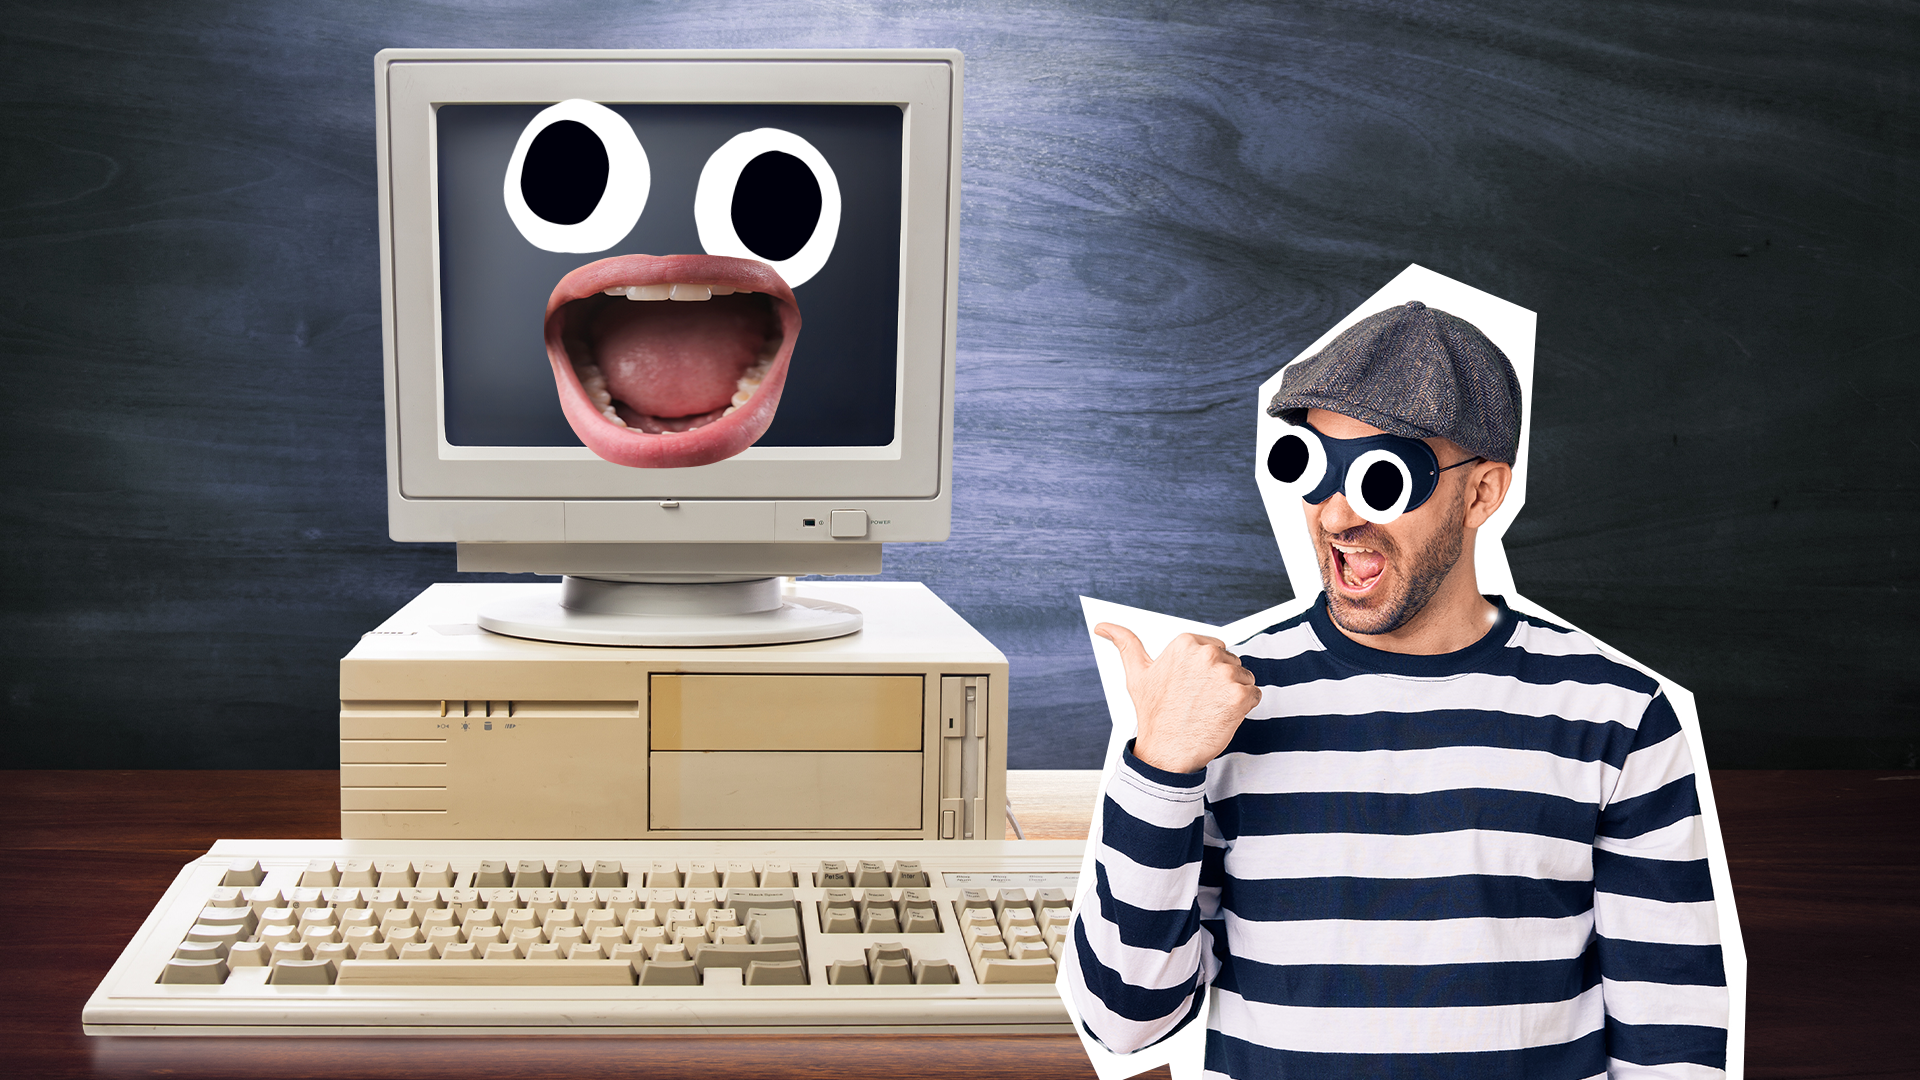 Sneaky looking burglar and old computer with shocked face